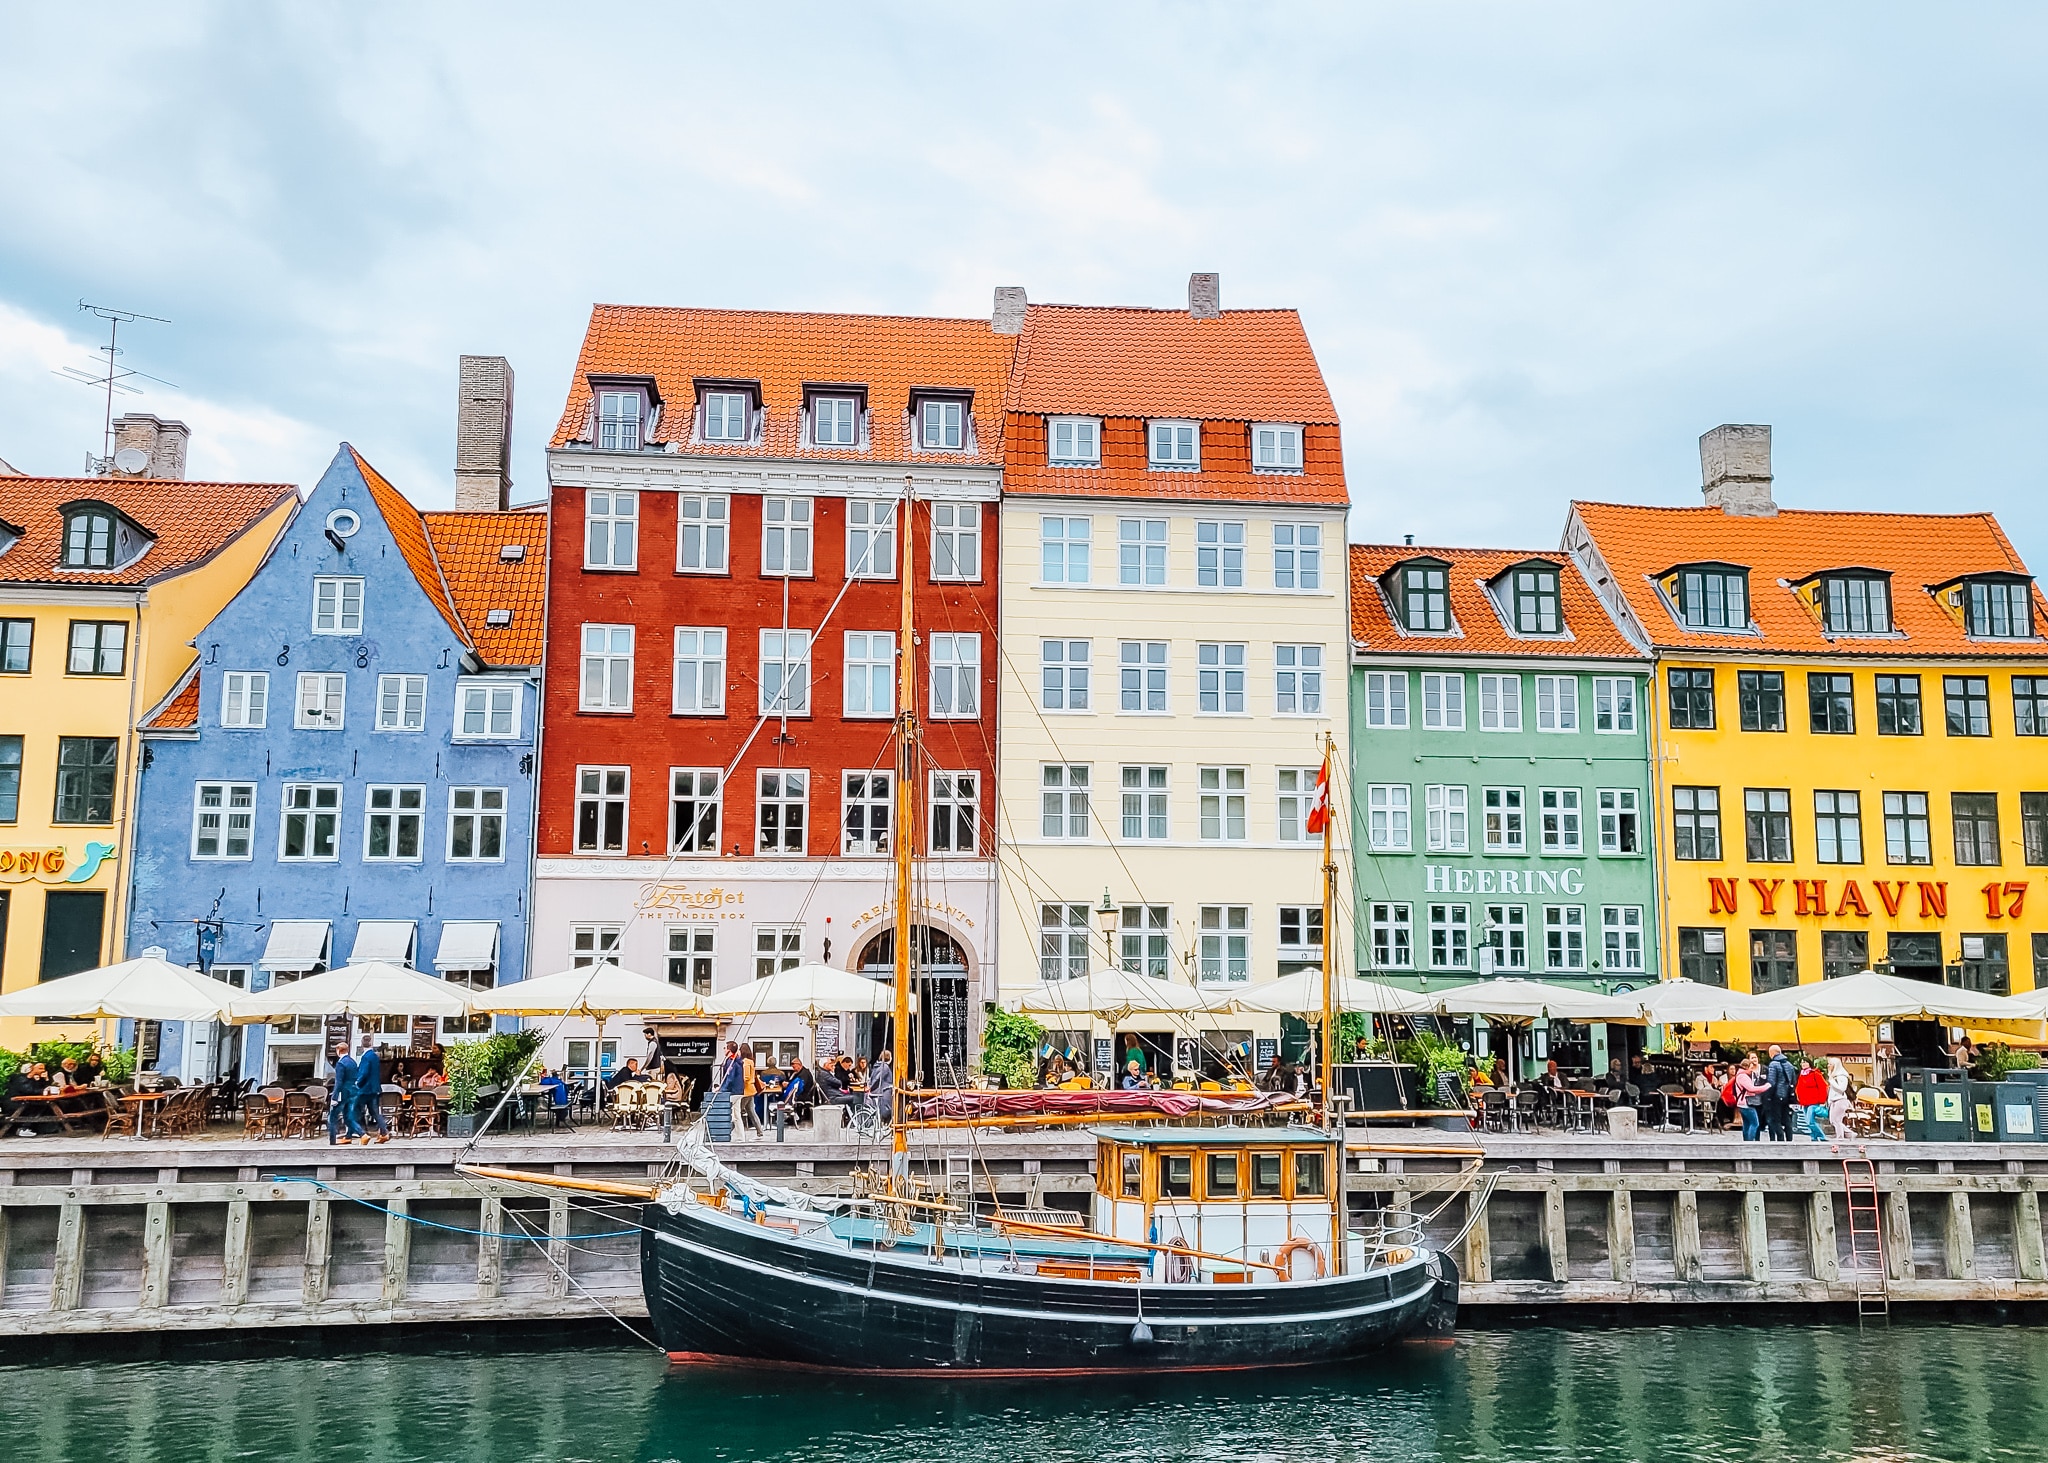 3 Day Copenhagen Itinerary: What To See and Do